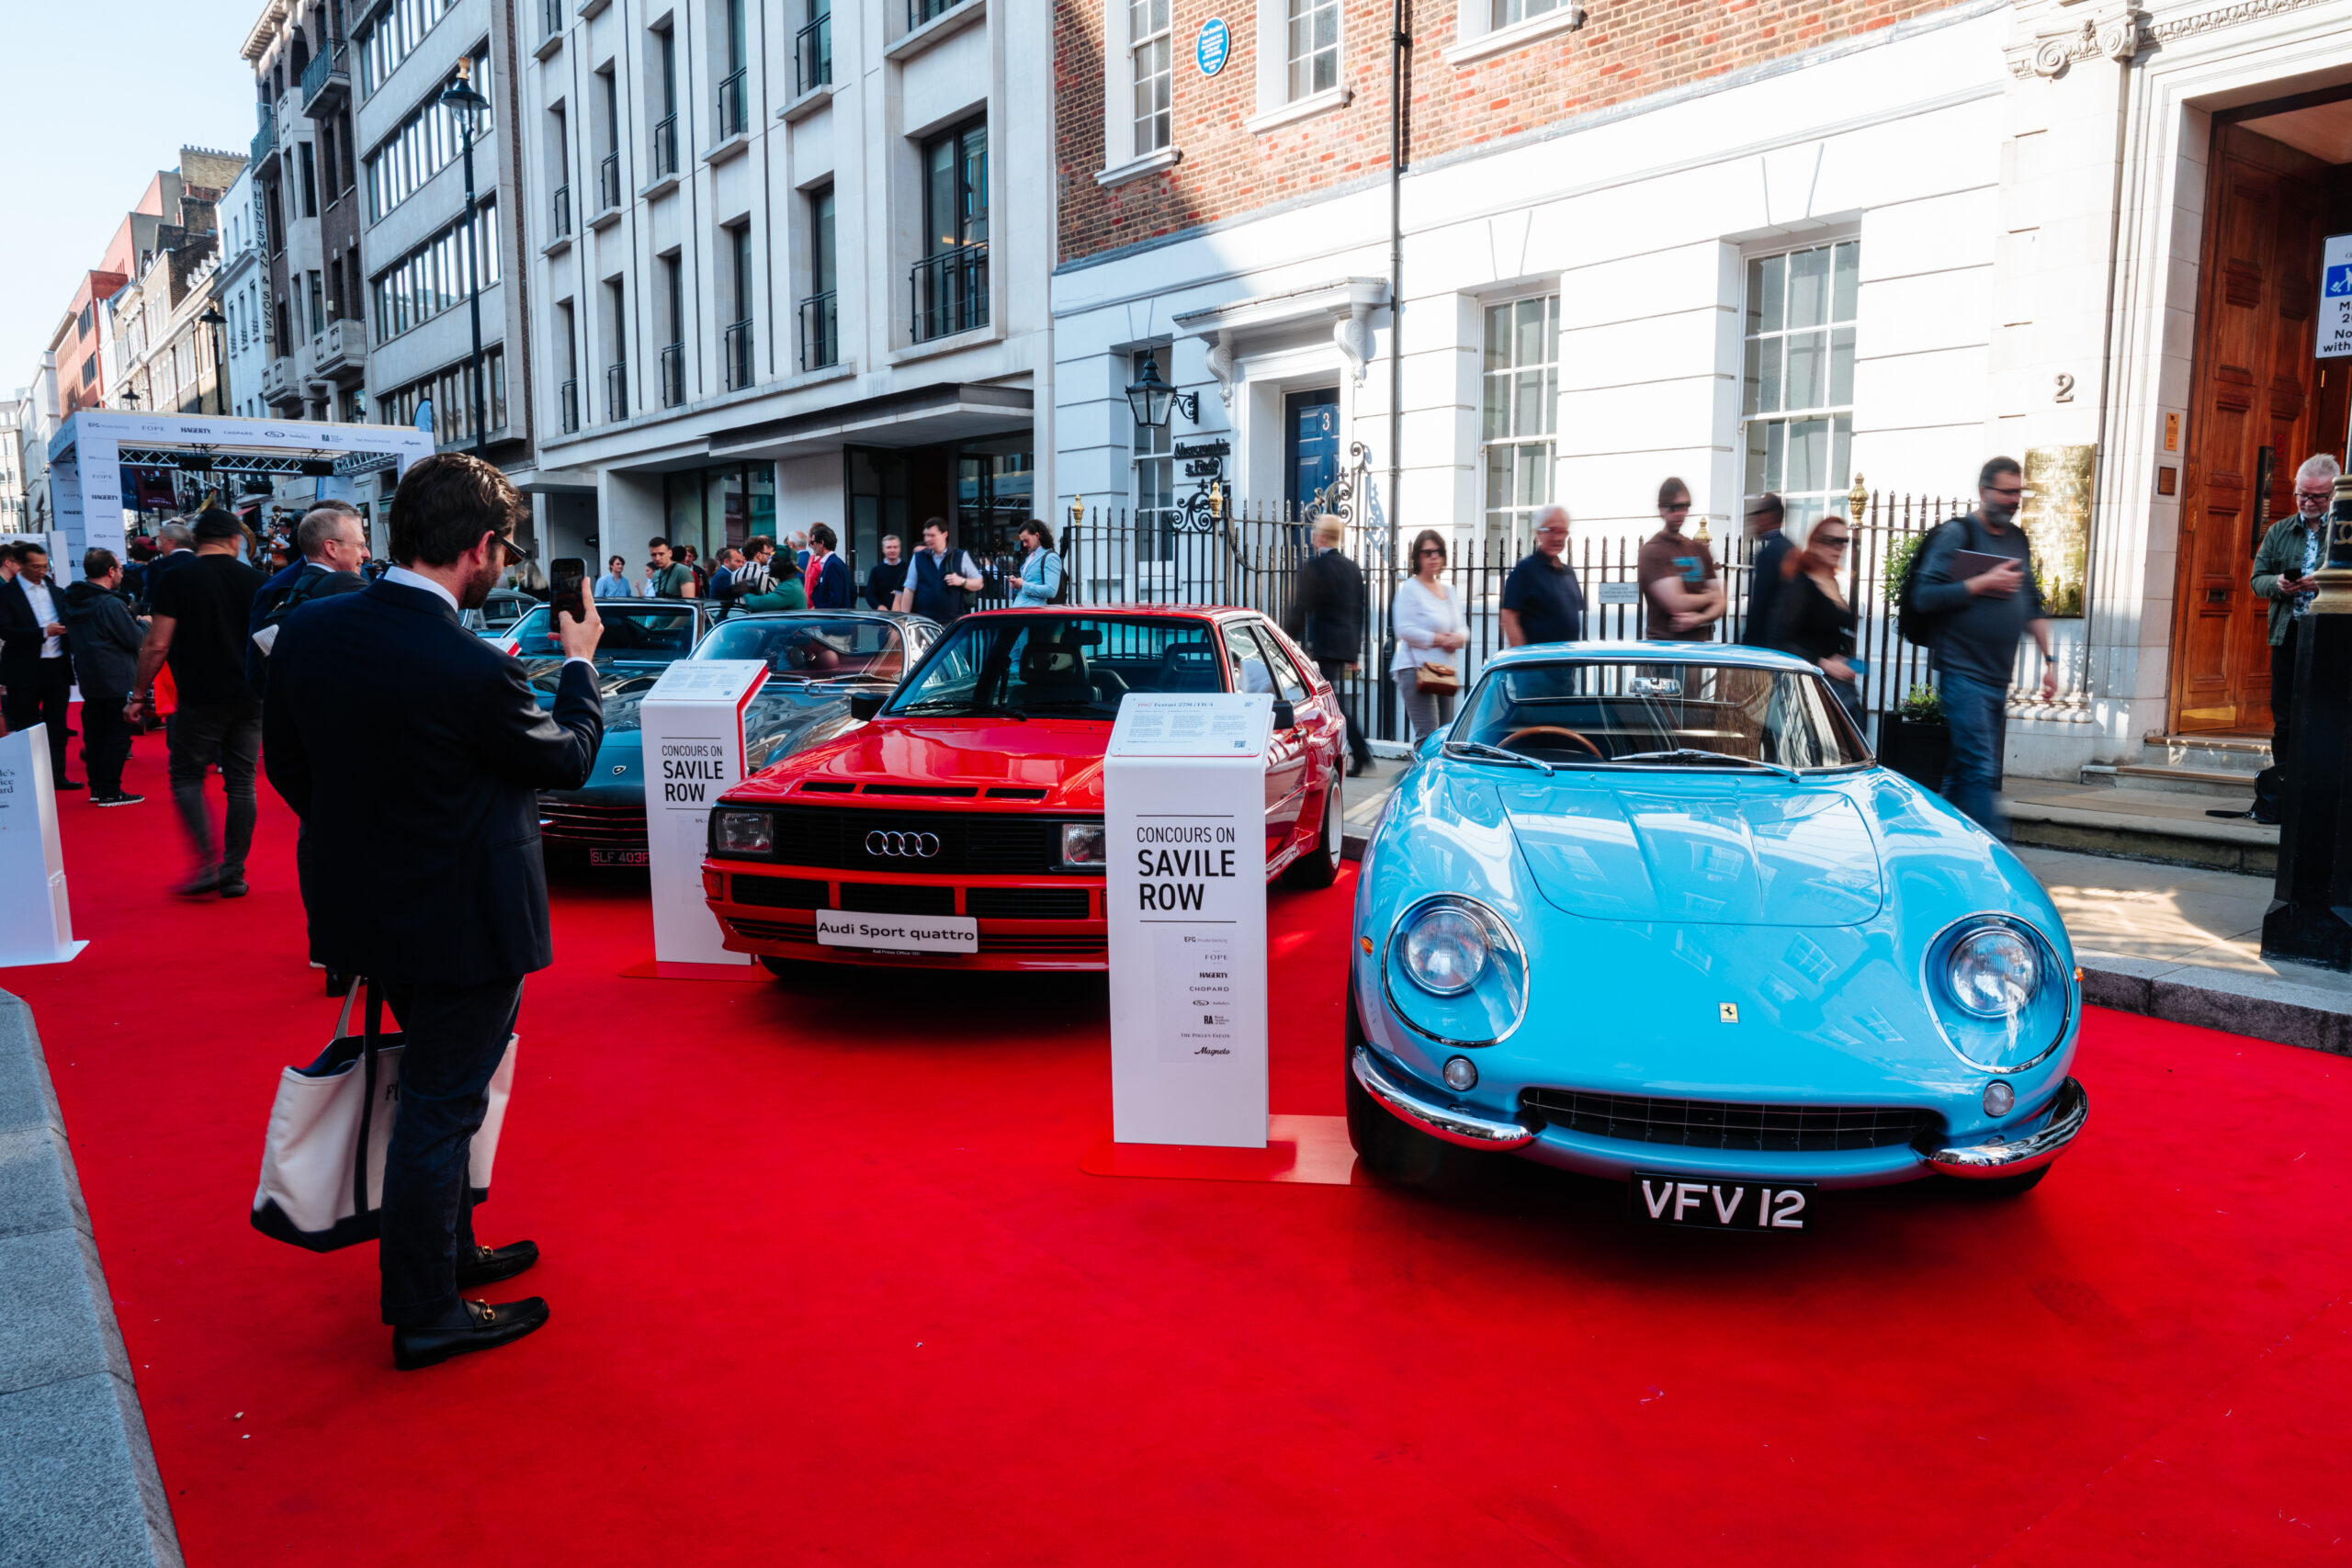 Hagerty - Concours on Savile Row